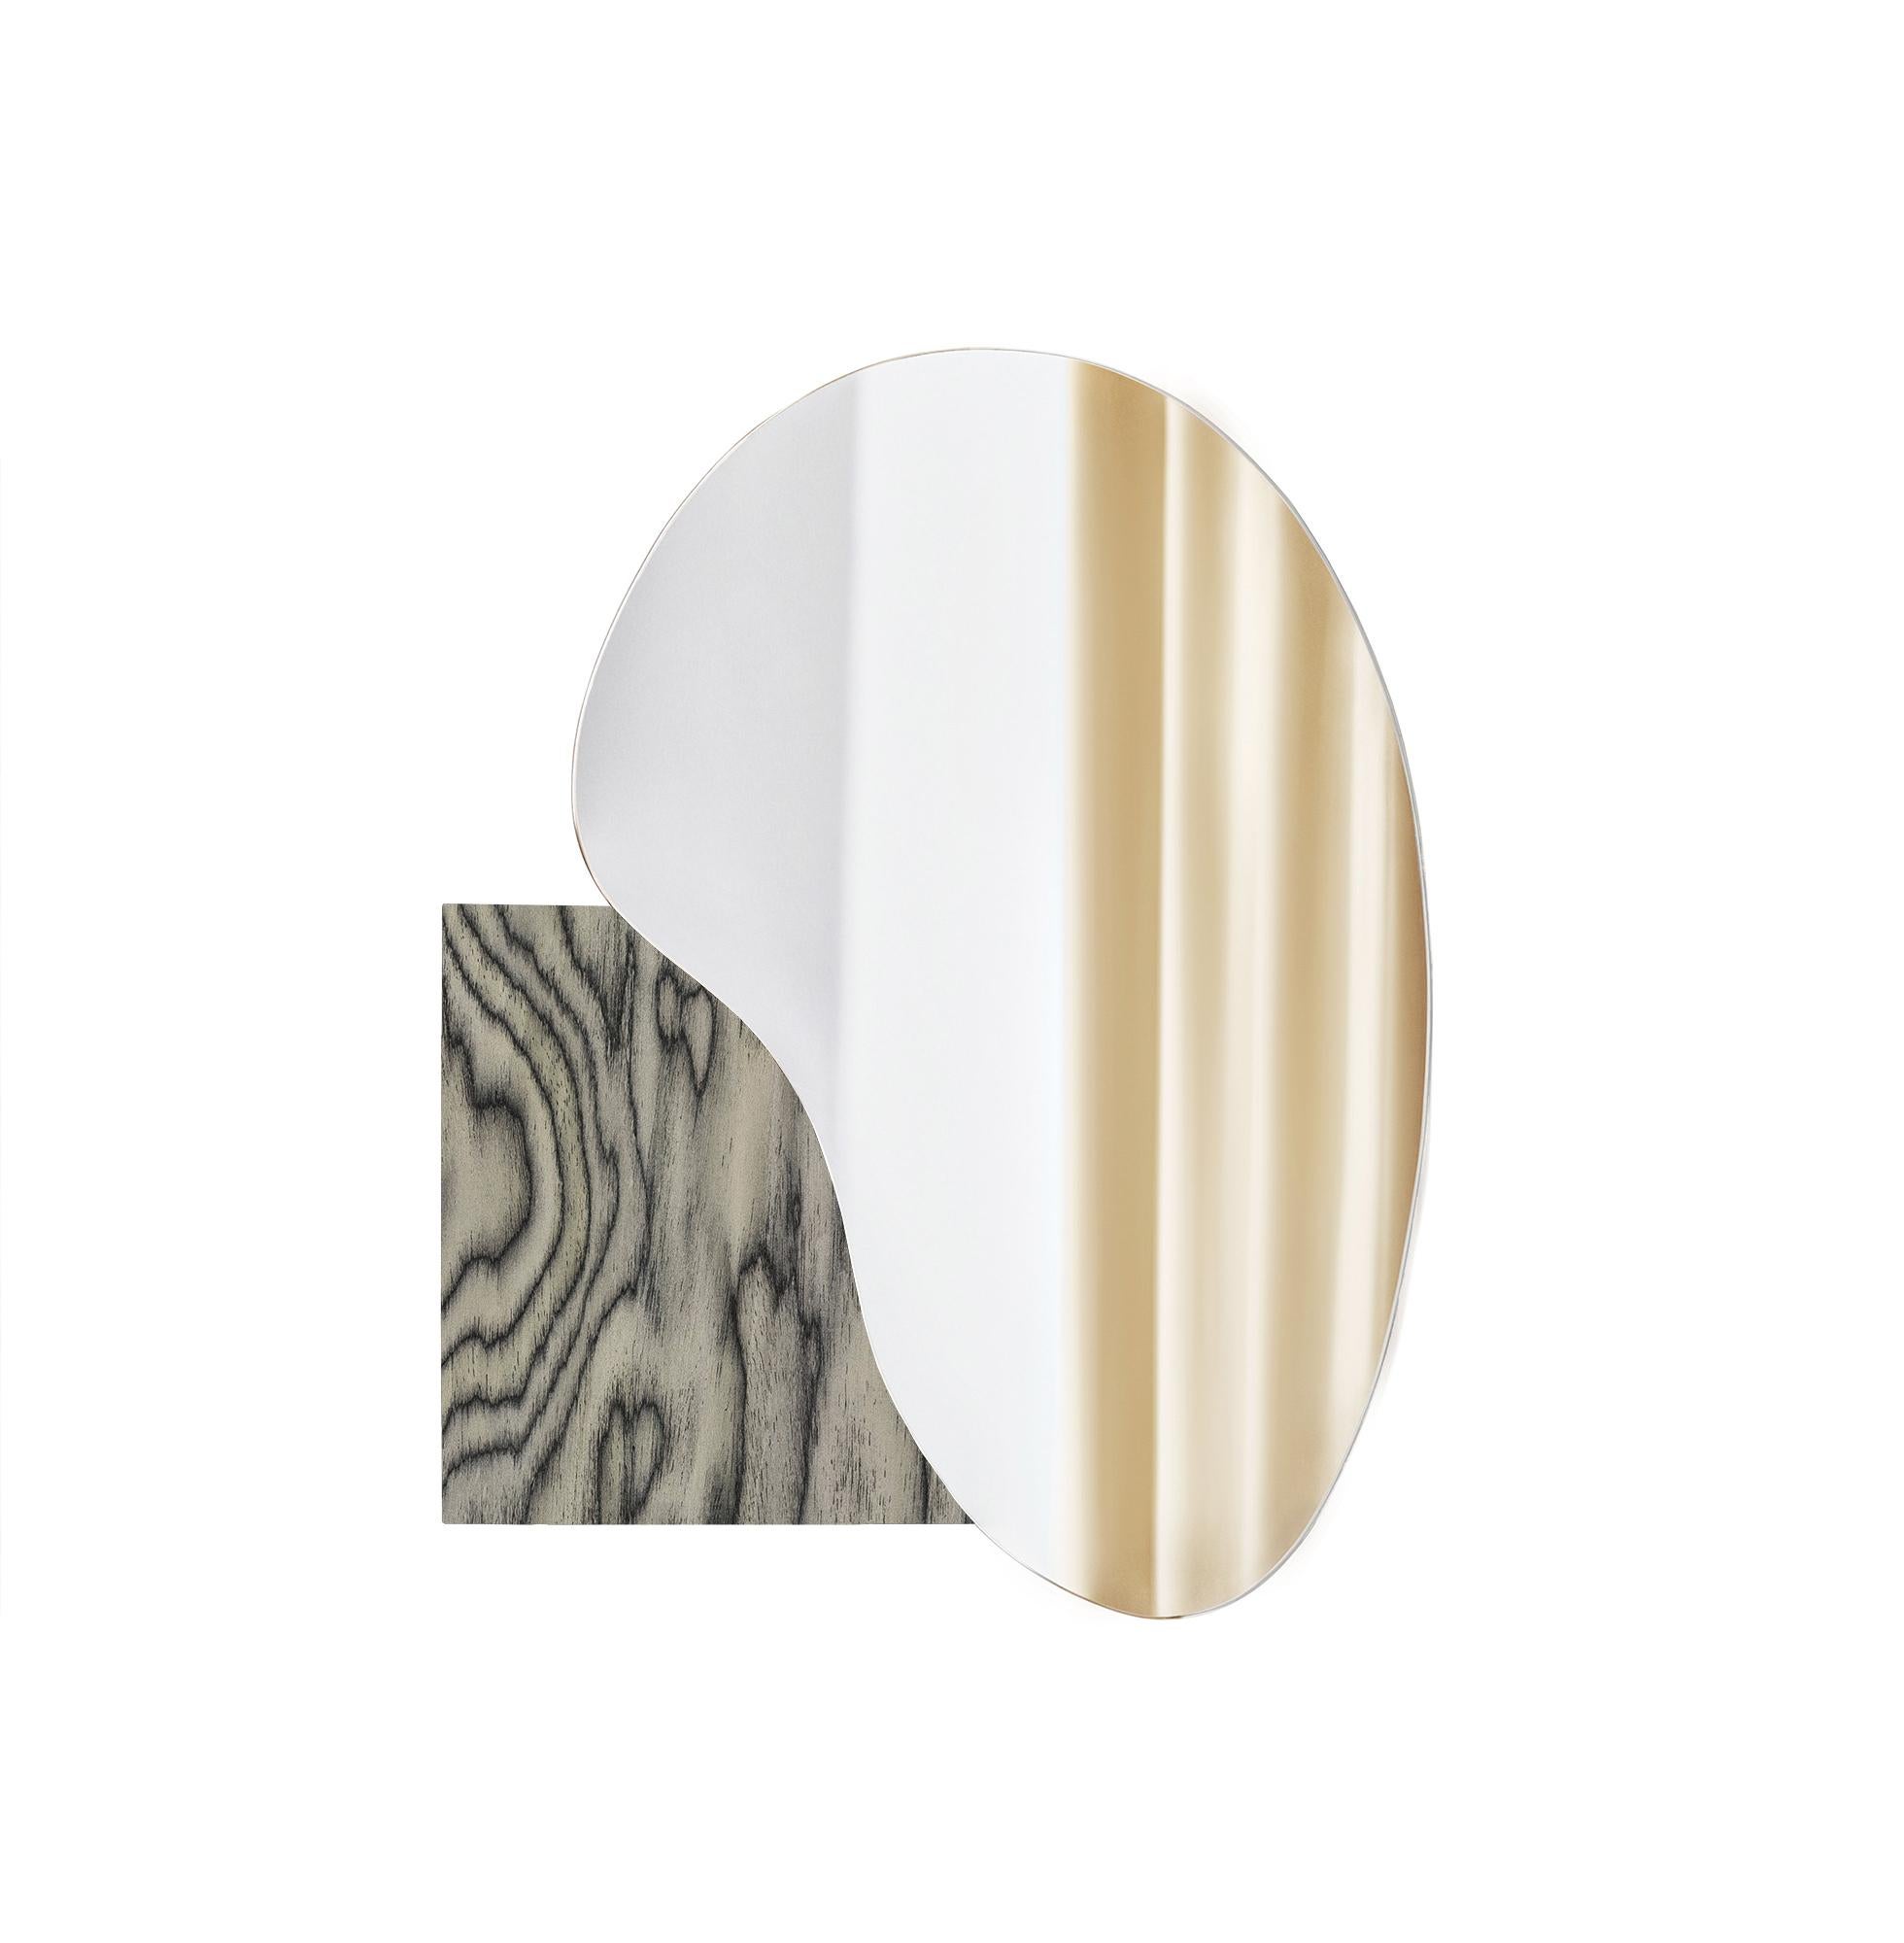 Contemporary Modern Wall Mirror Lake 4 by Noom in Ettore Sottsass ALPI Wood Veneer